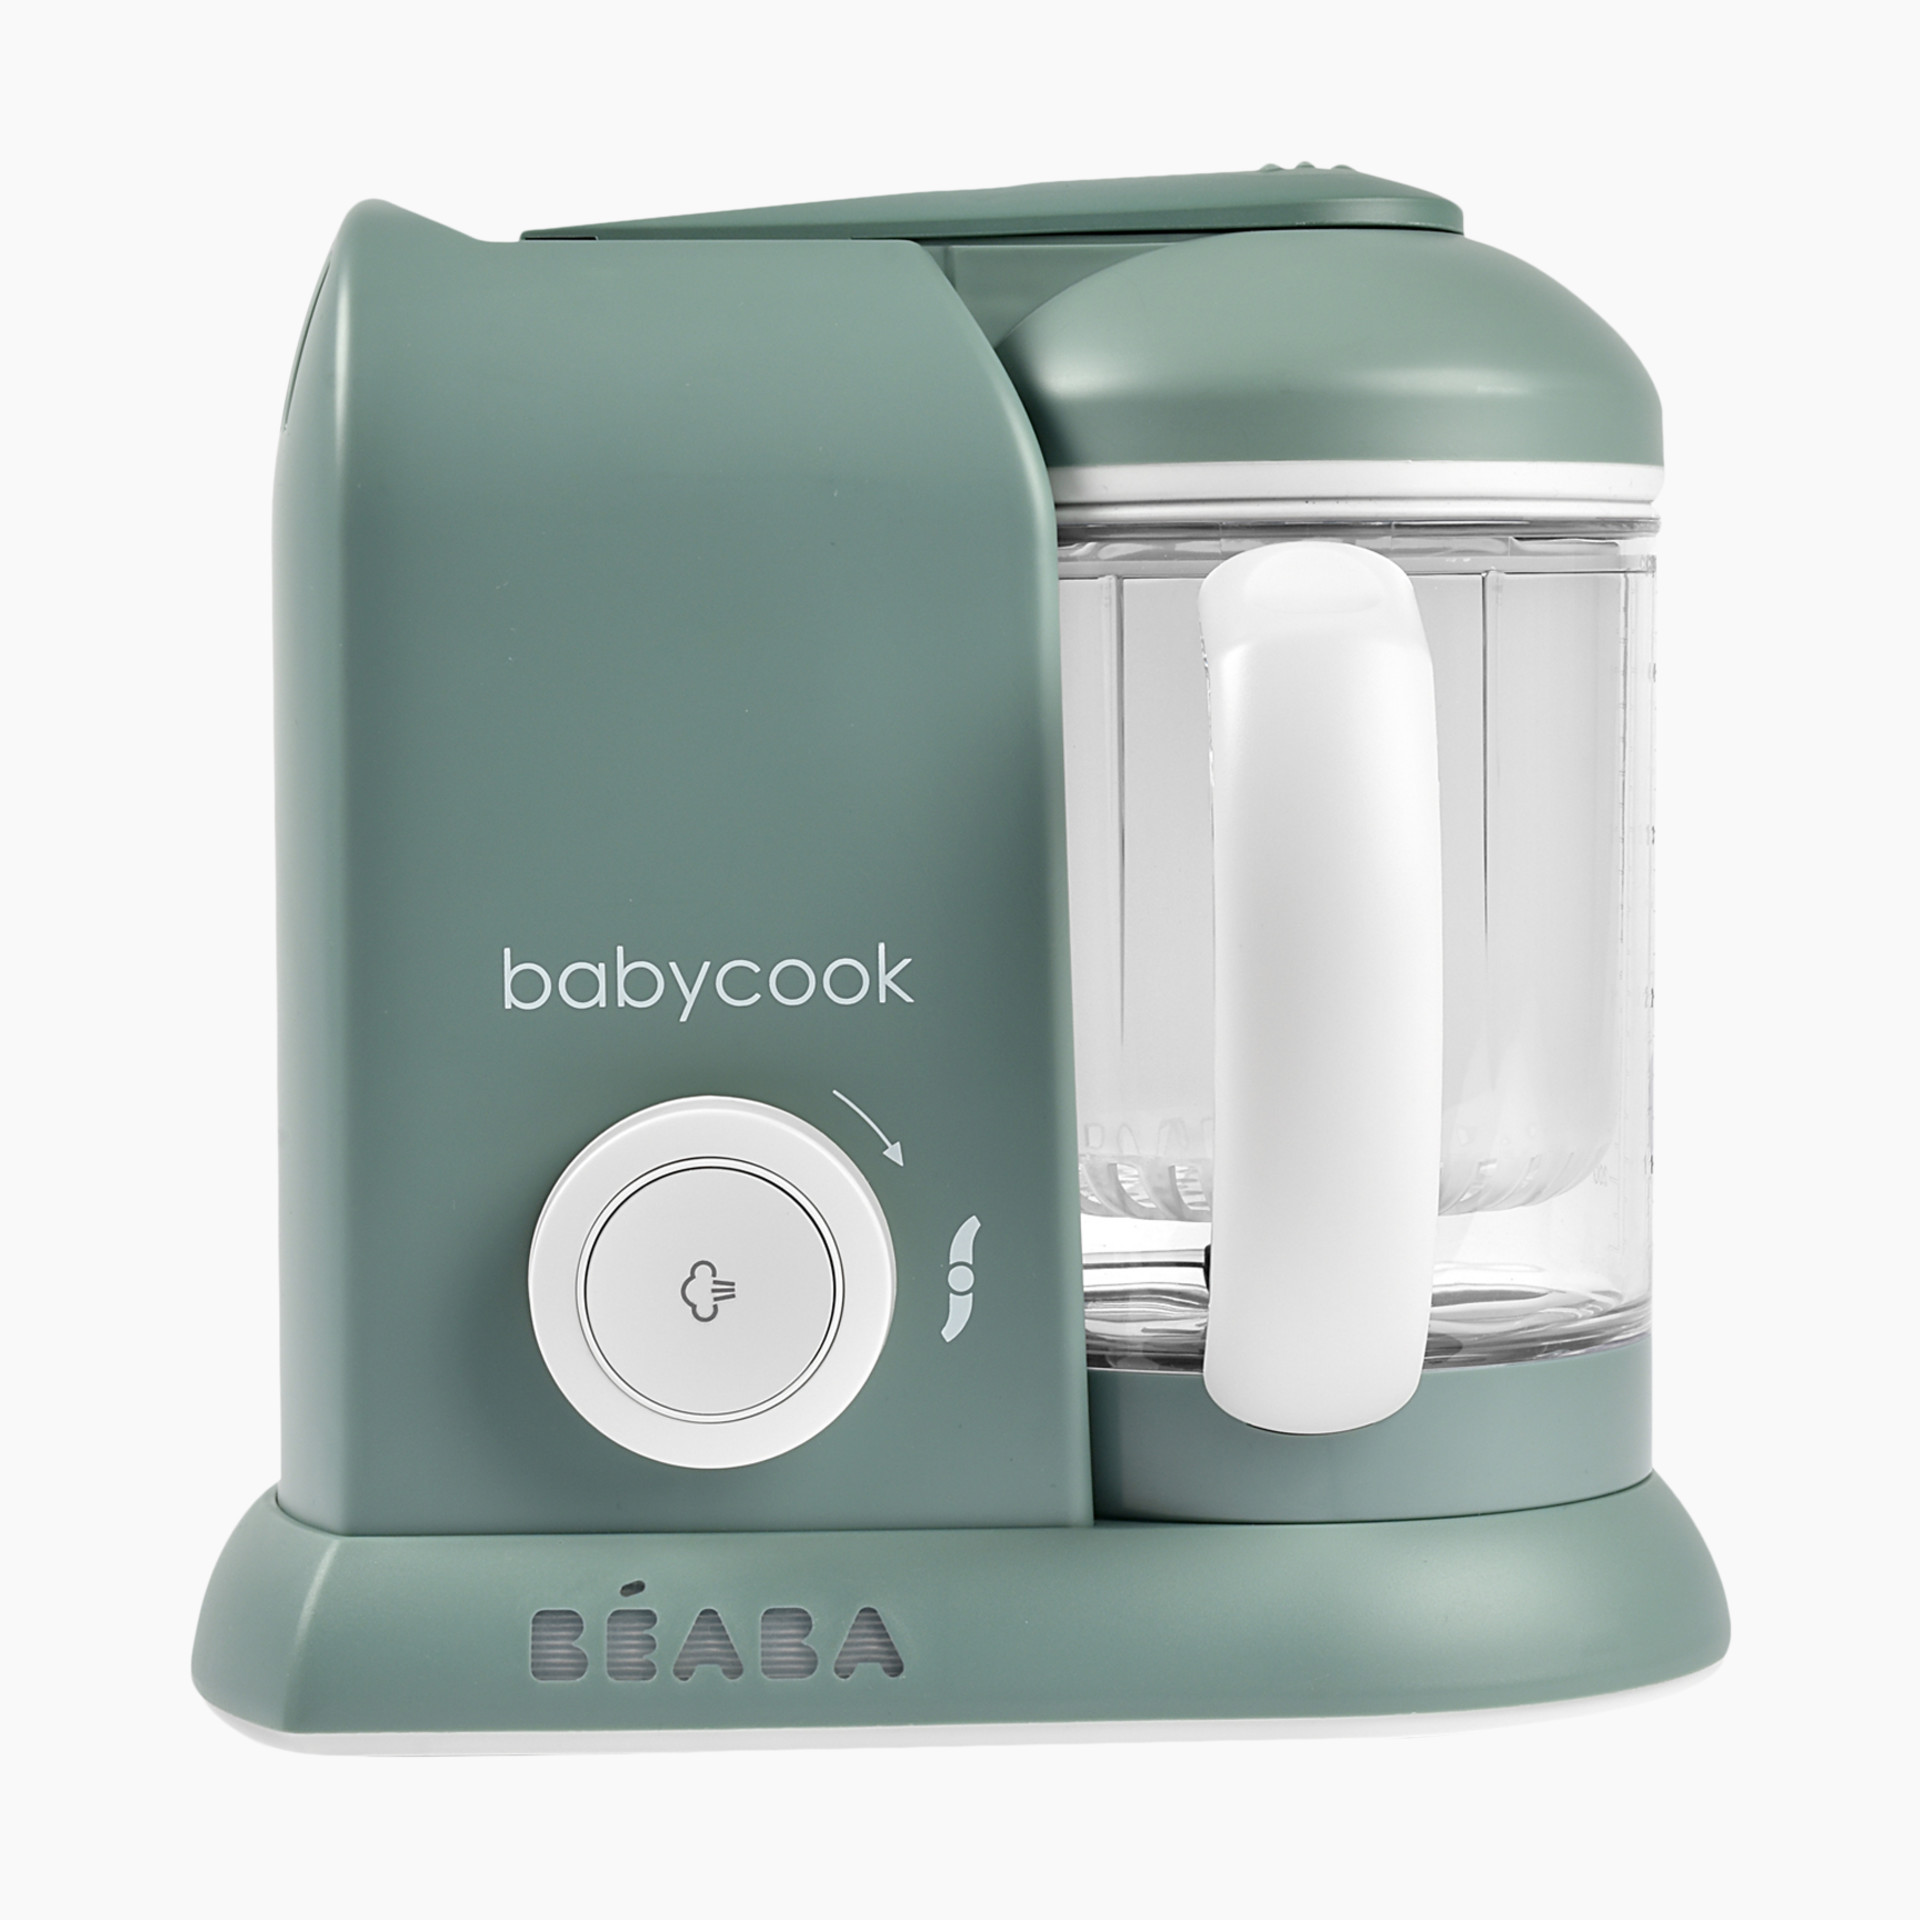 BEABA Babycook Express - the Fastest Babycook, Baby Food Maker, Baby Food  Processor, Baby Food Steamer, Large Capacity, Make Healthy Food for Baby in